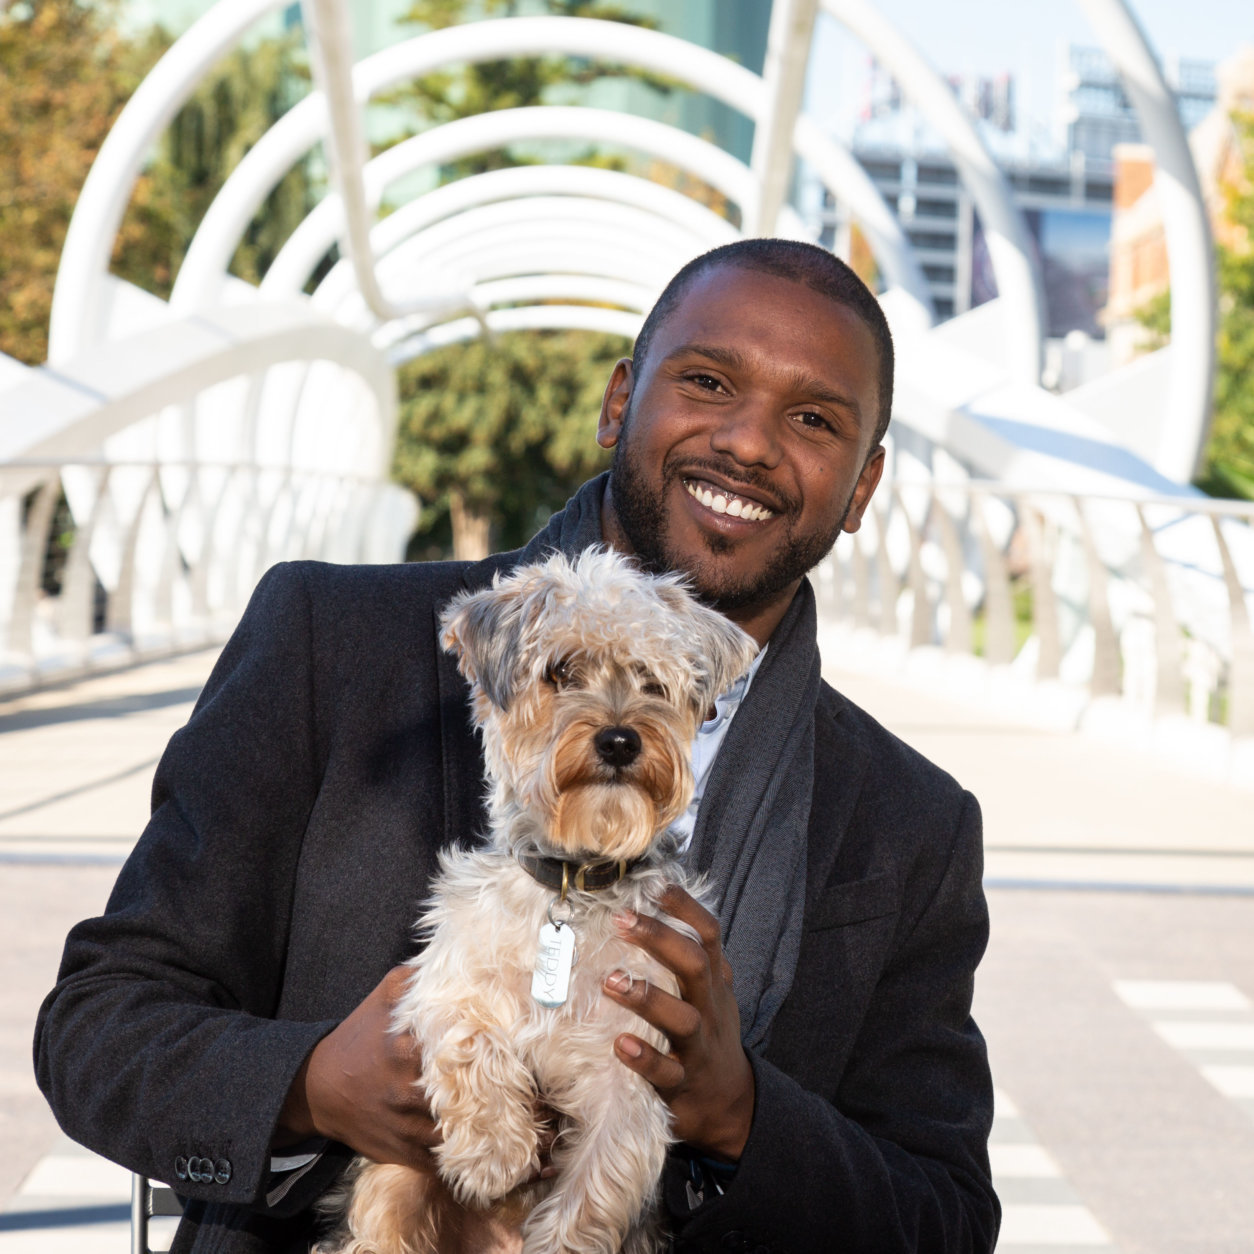 Victor Jimenez, public information officer for the Mayor’s Office of Community Affairs, hits the town with his dog Teddy. (Courtesy Humane Rescue Alliance)